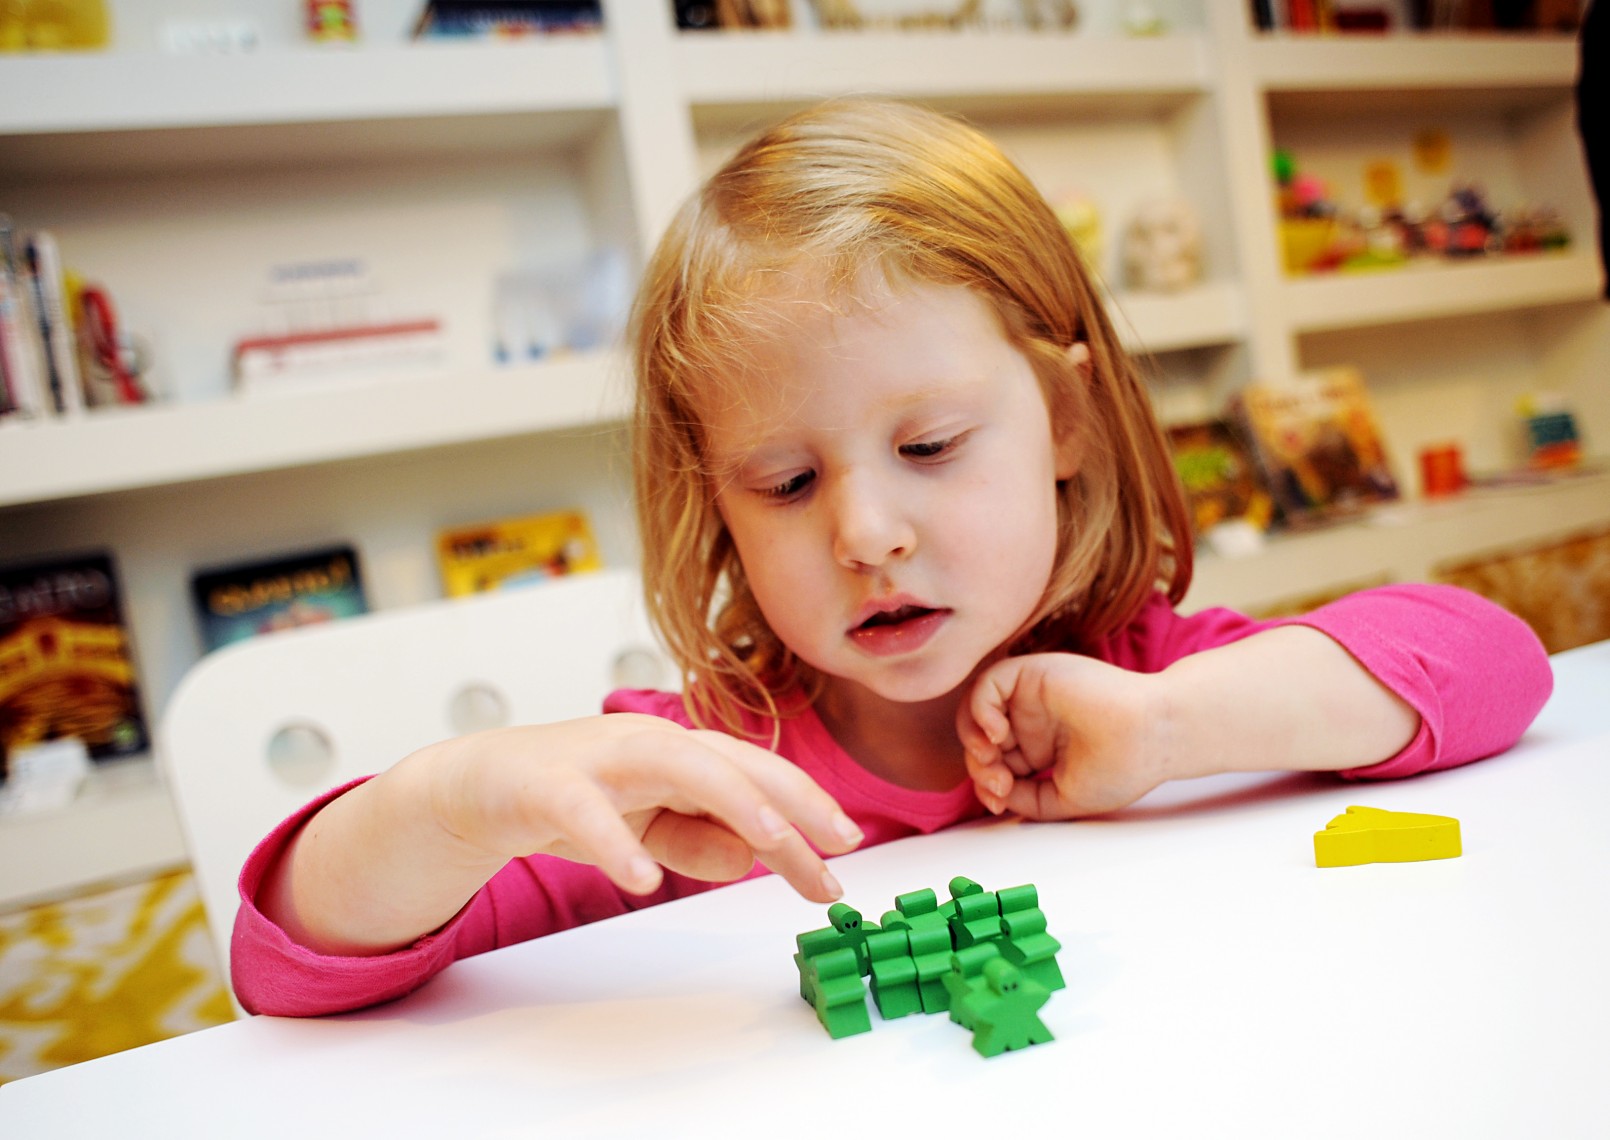 Play and the Myth of Kids' Games » The Daily Worker Placement